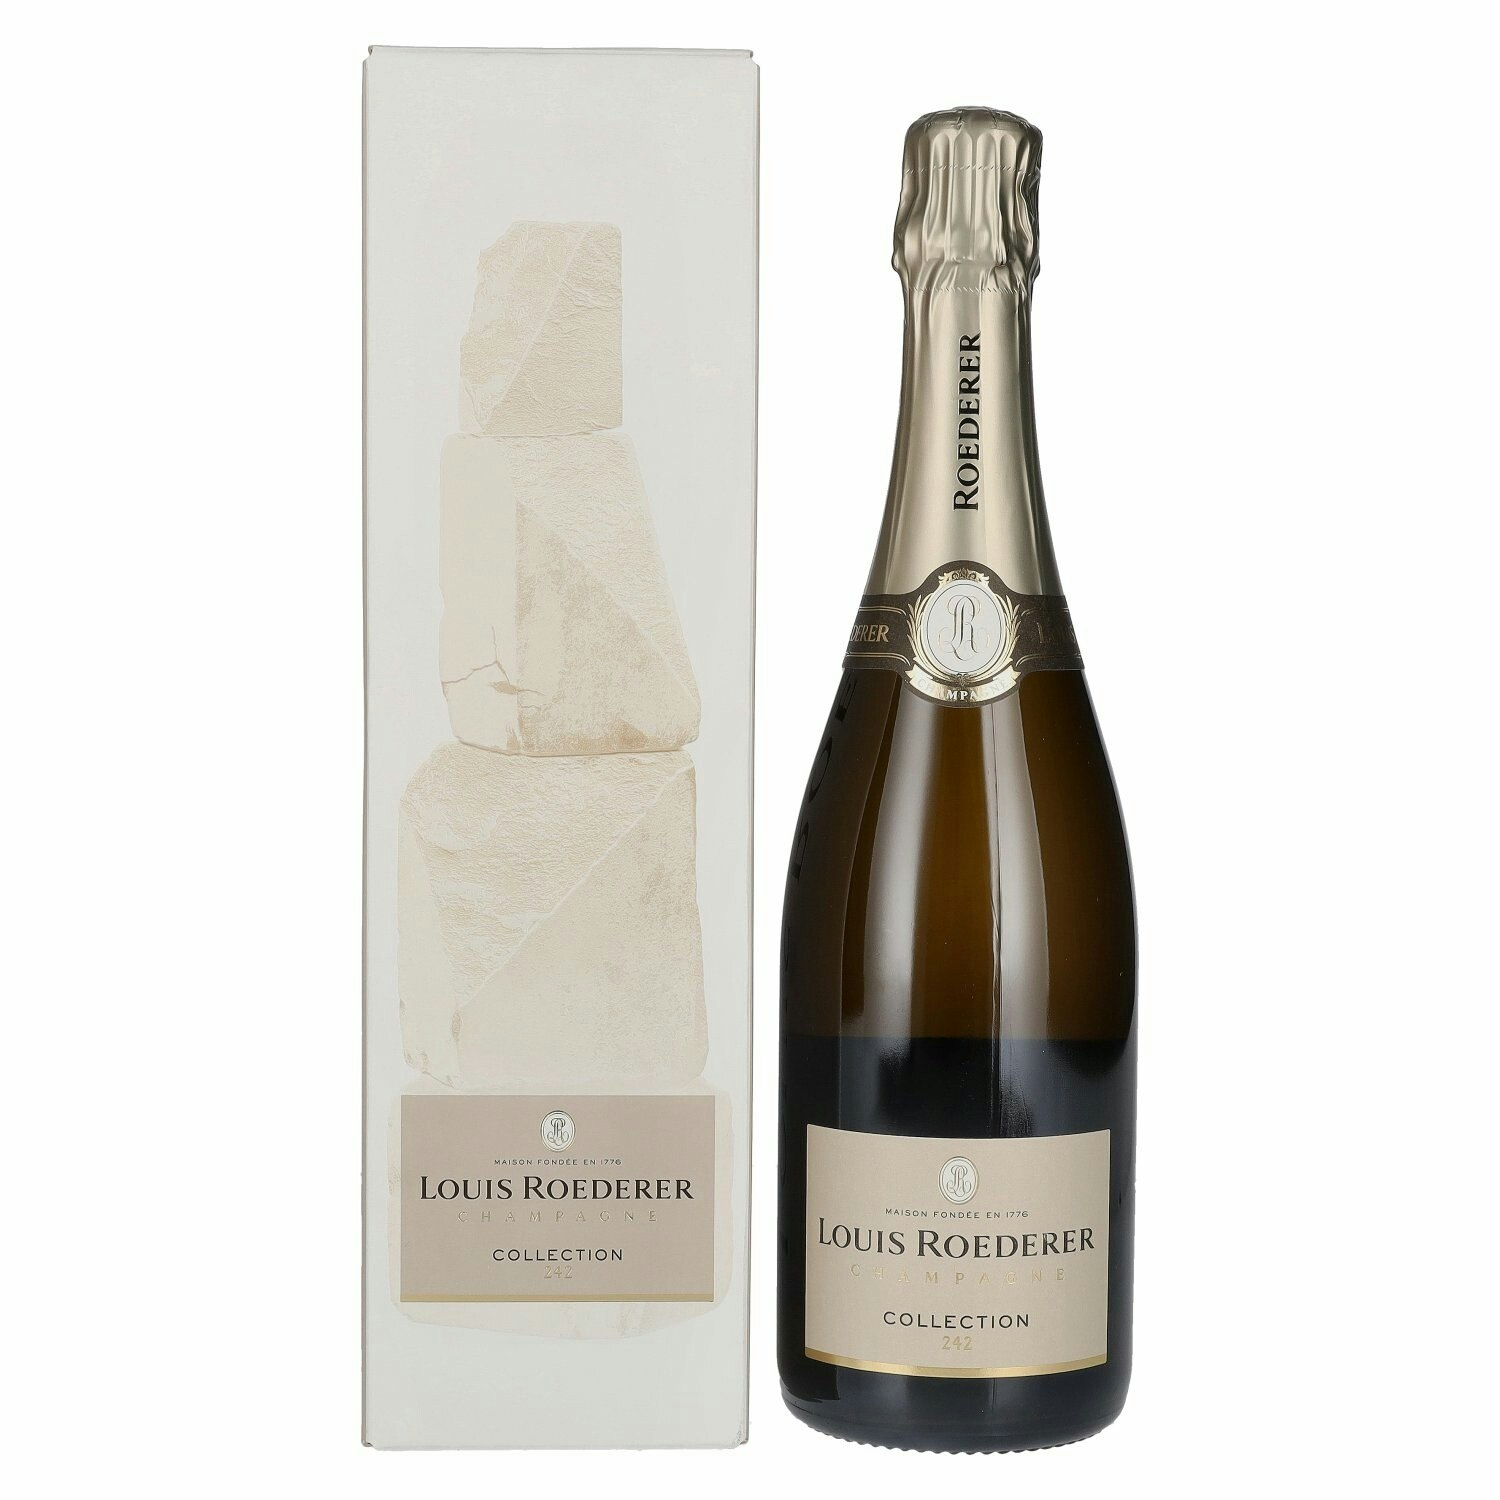 Louis Roederer Champagne Collection 242 12% Vol. 0,75l in Giftbox